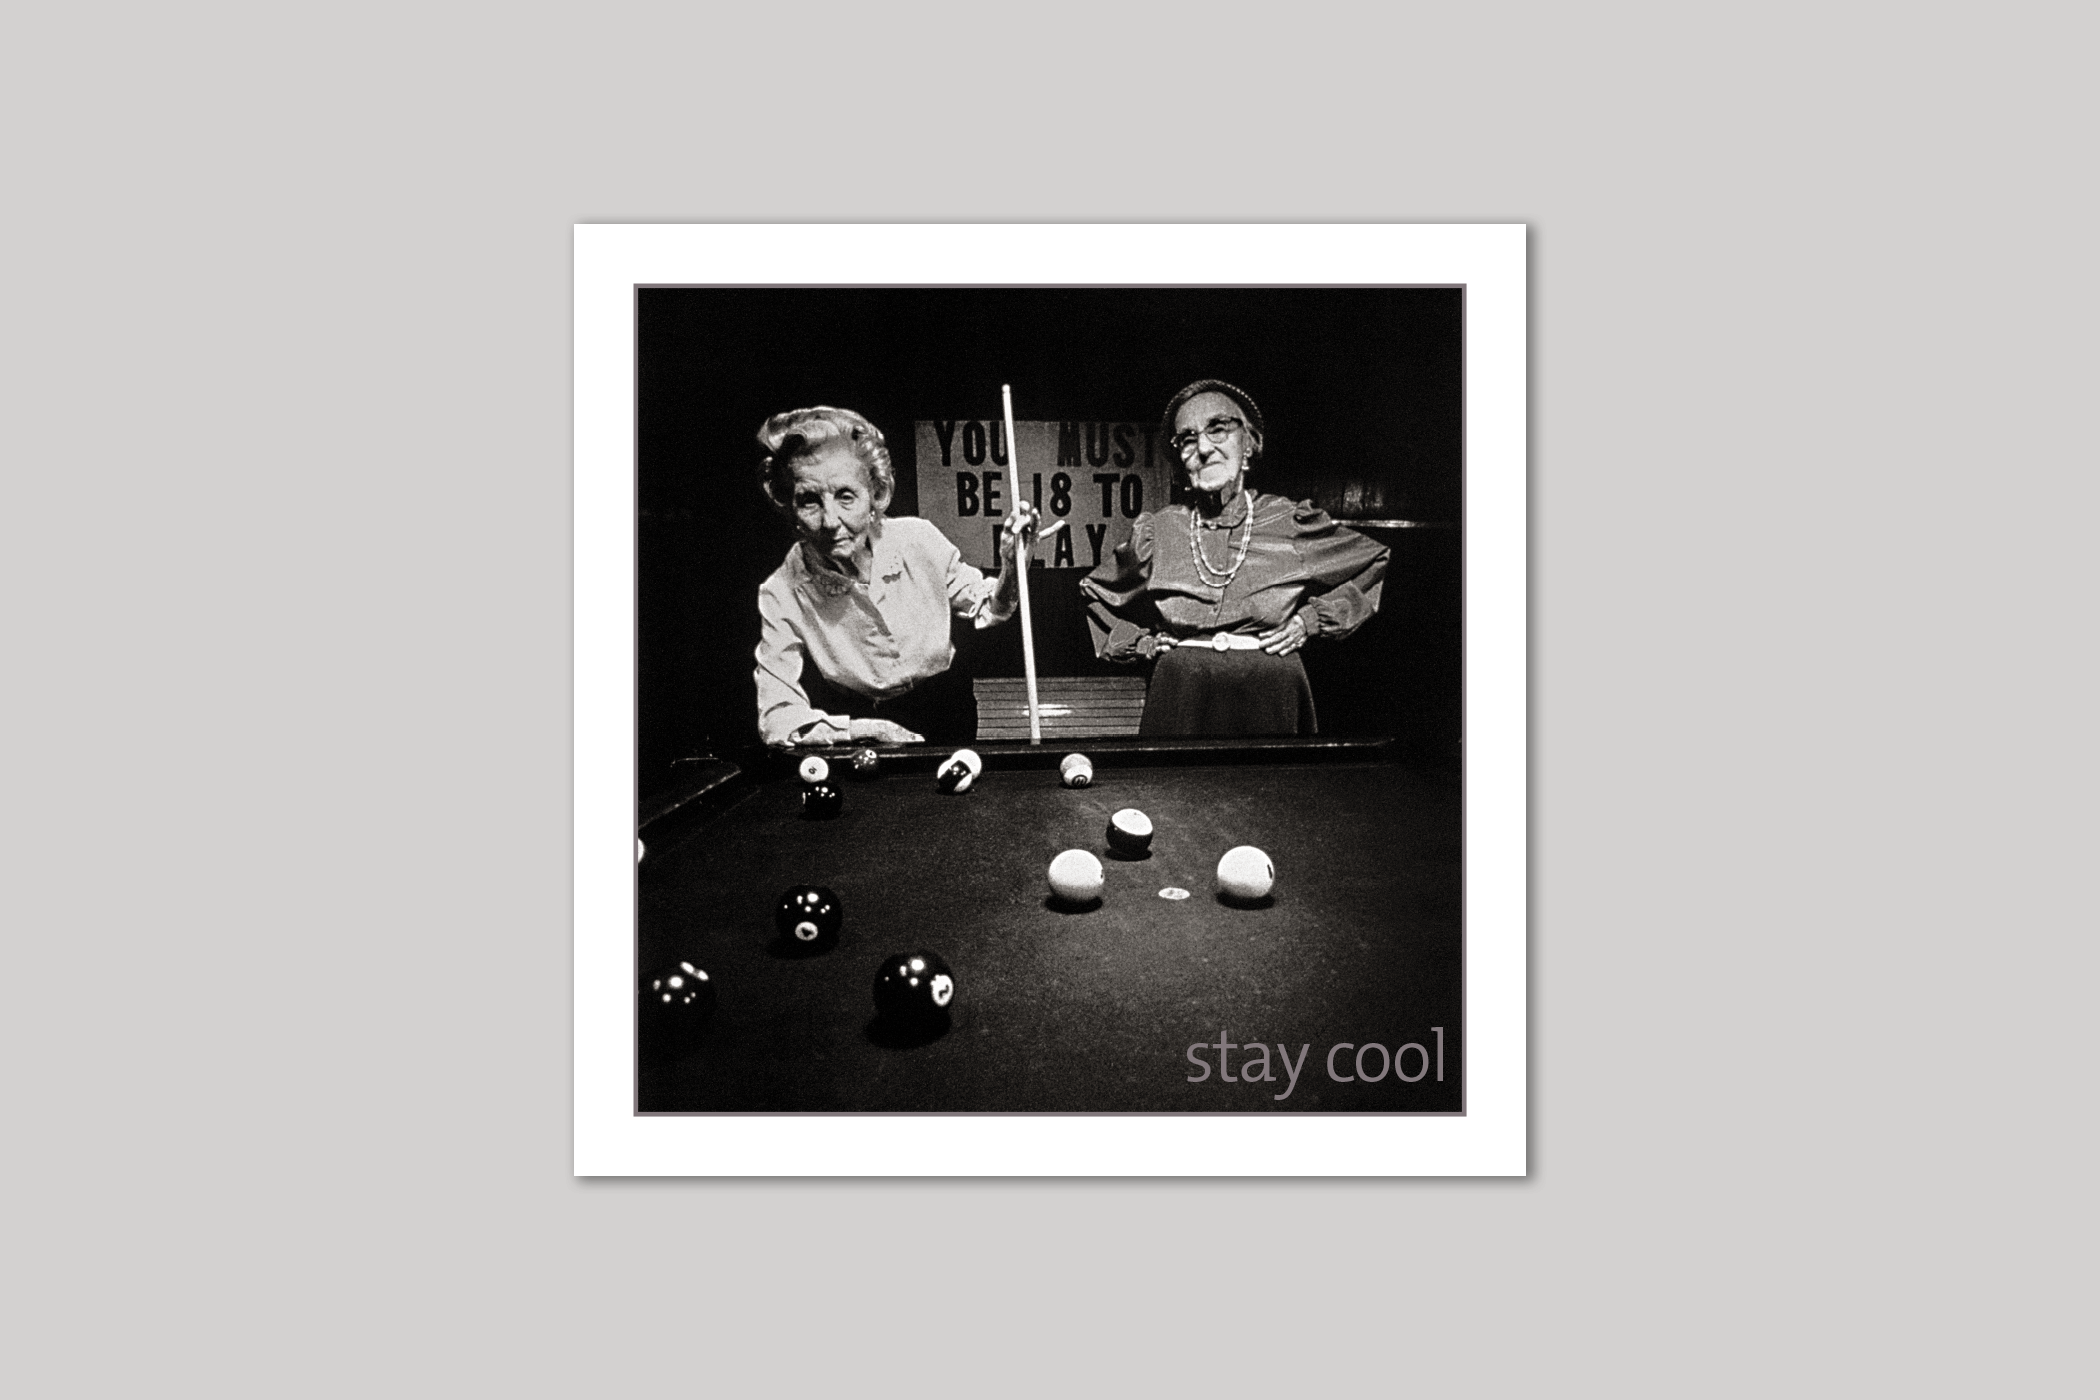 Stay Cool from Exposure Silver Edition range of greeting cards by Icon.